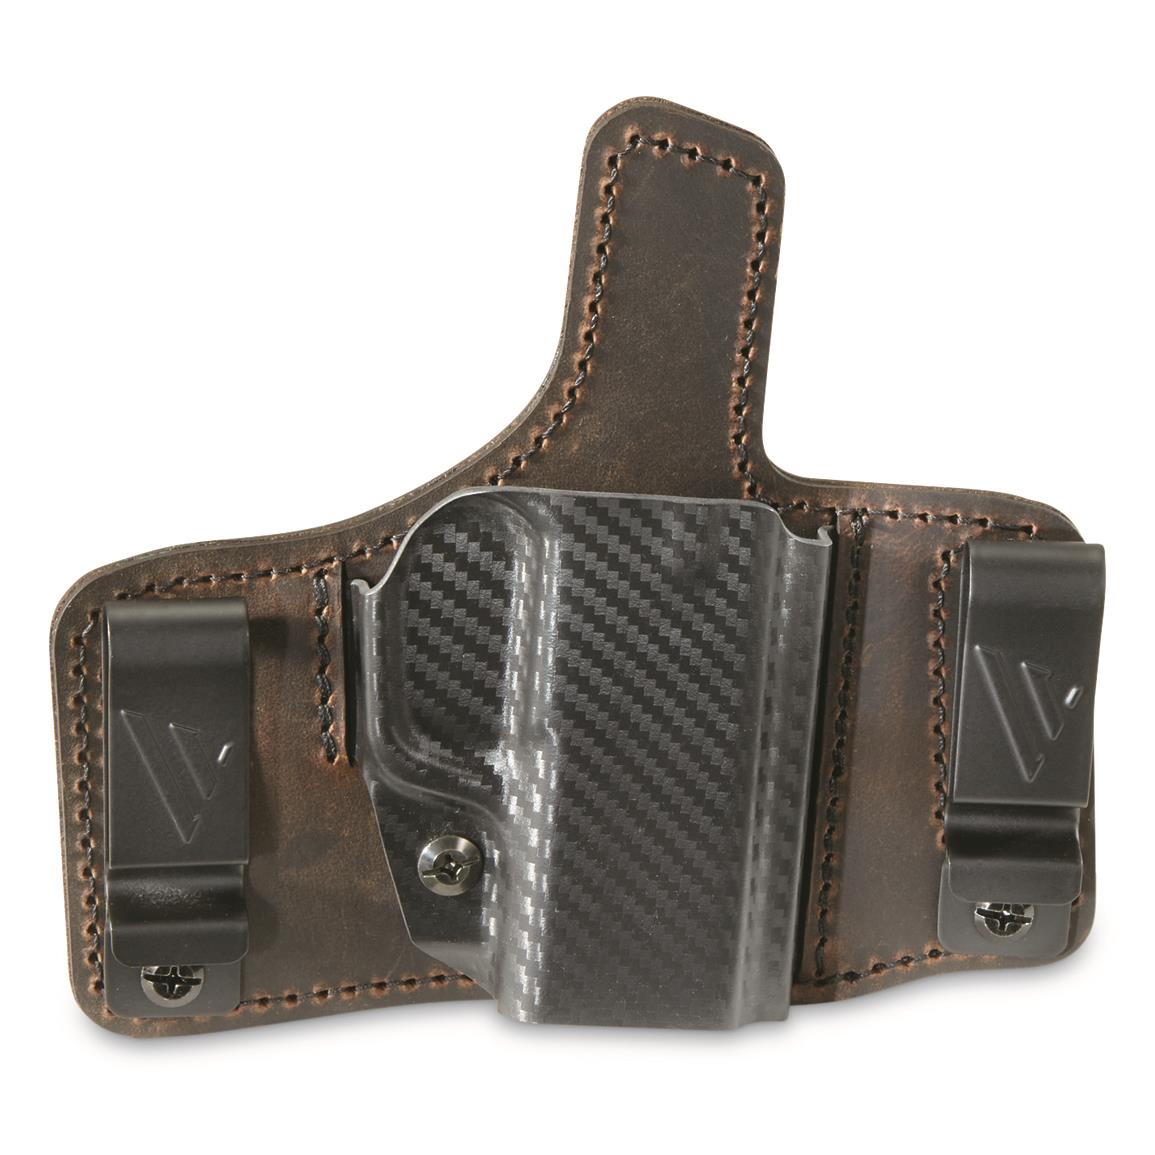 VersaCarry Insurgent Deluxe IWB/OWB Holster, Right Hand Draw, SIG SAUER P365